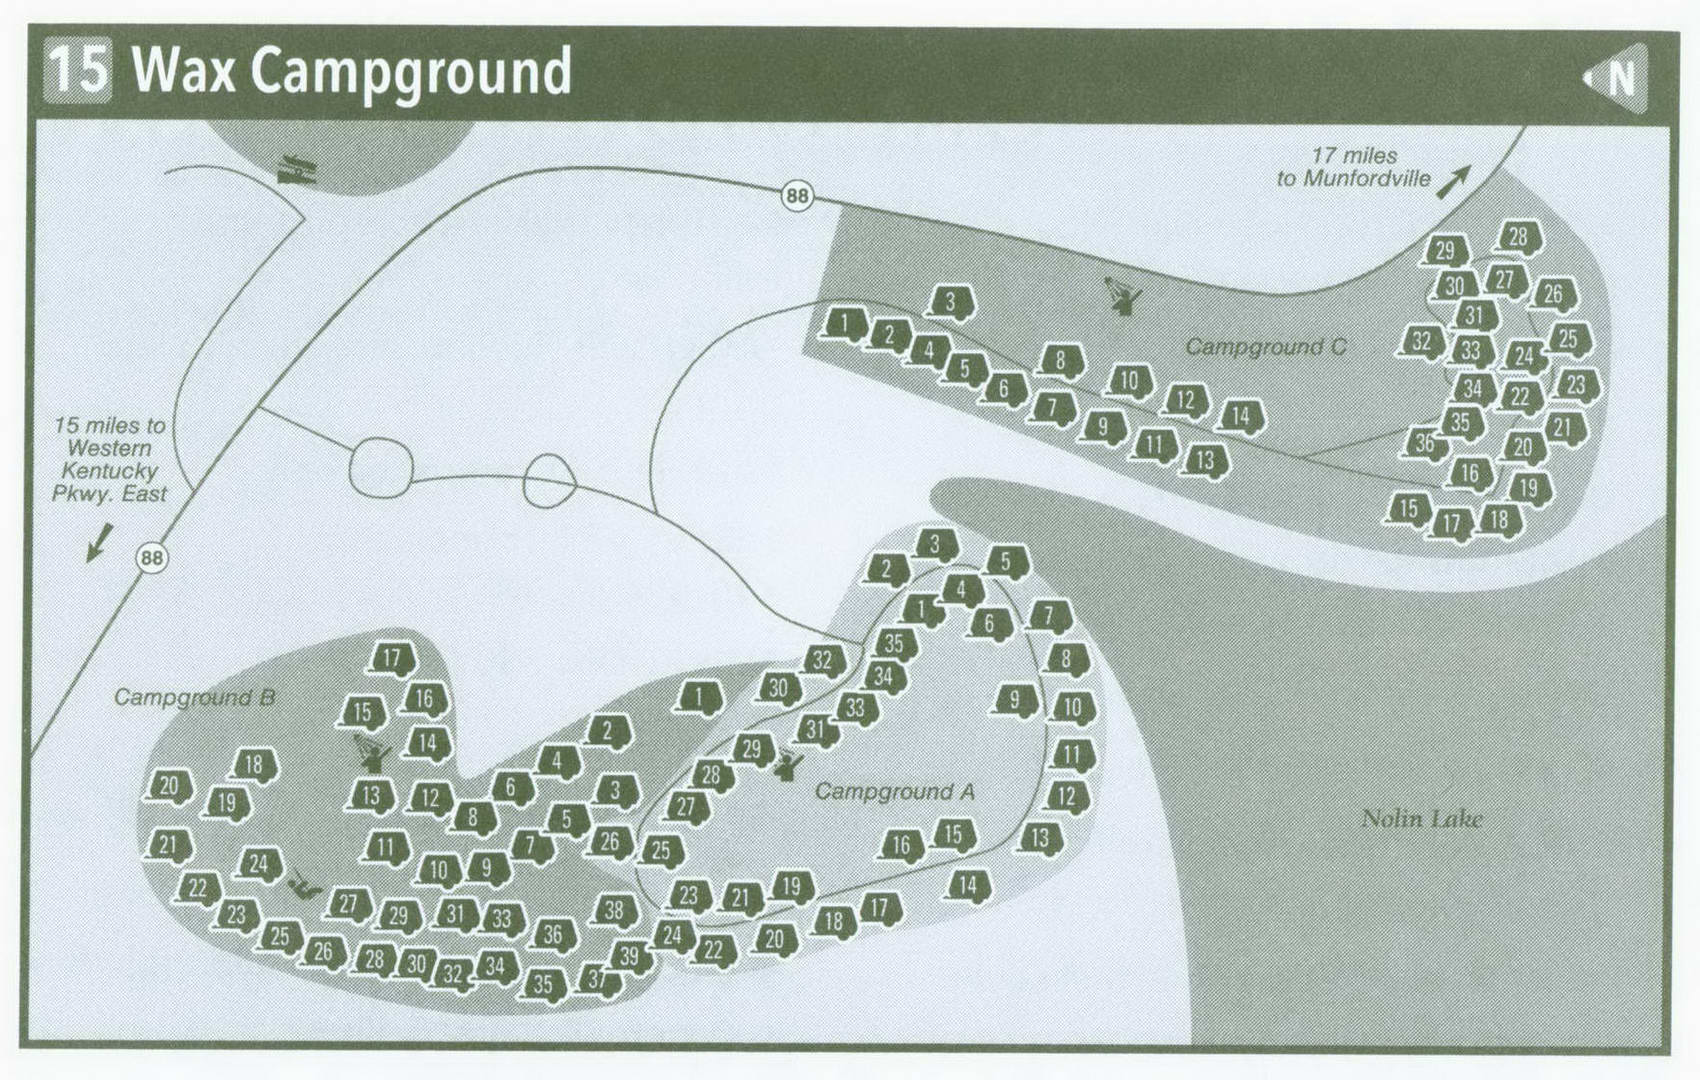 Plan of Wax Campground